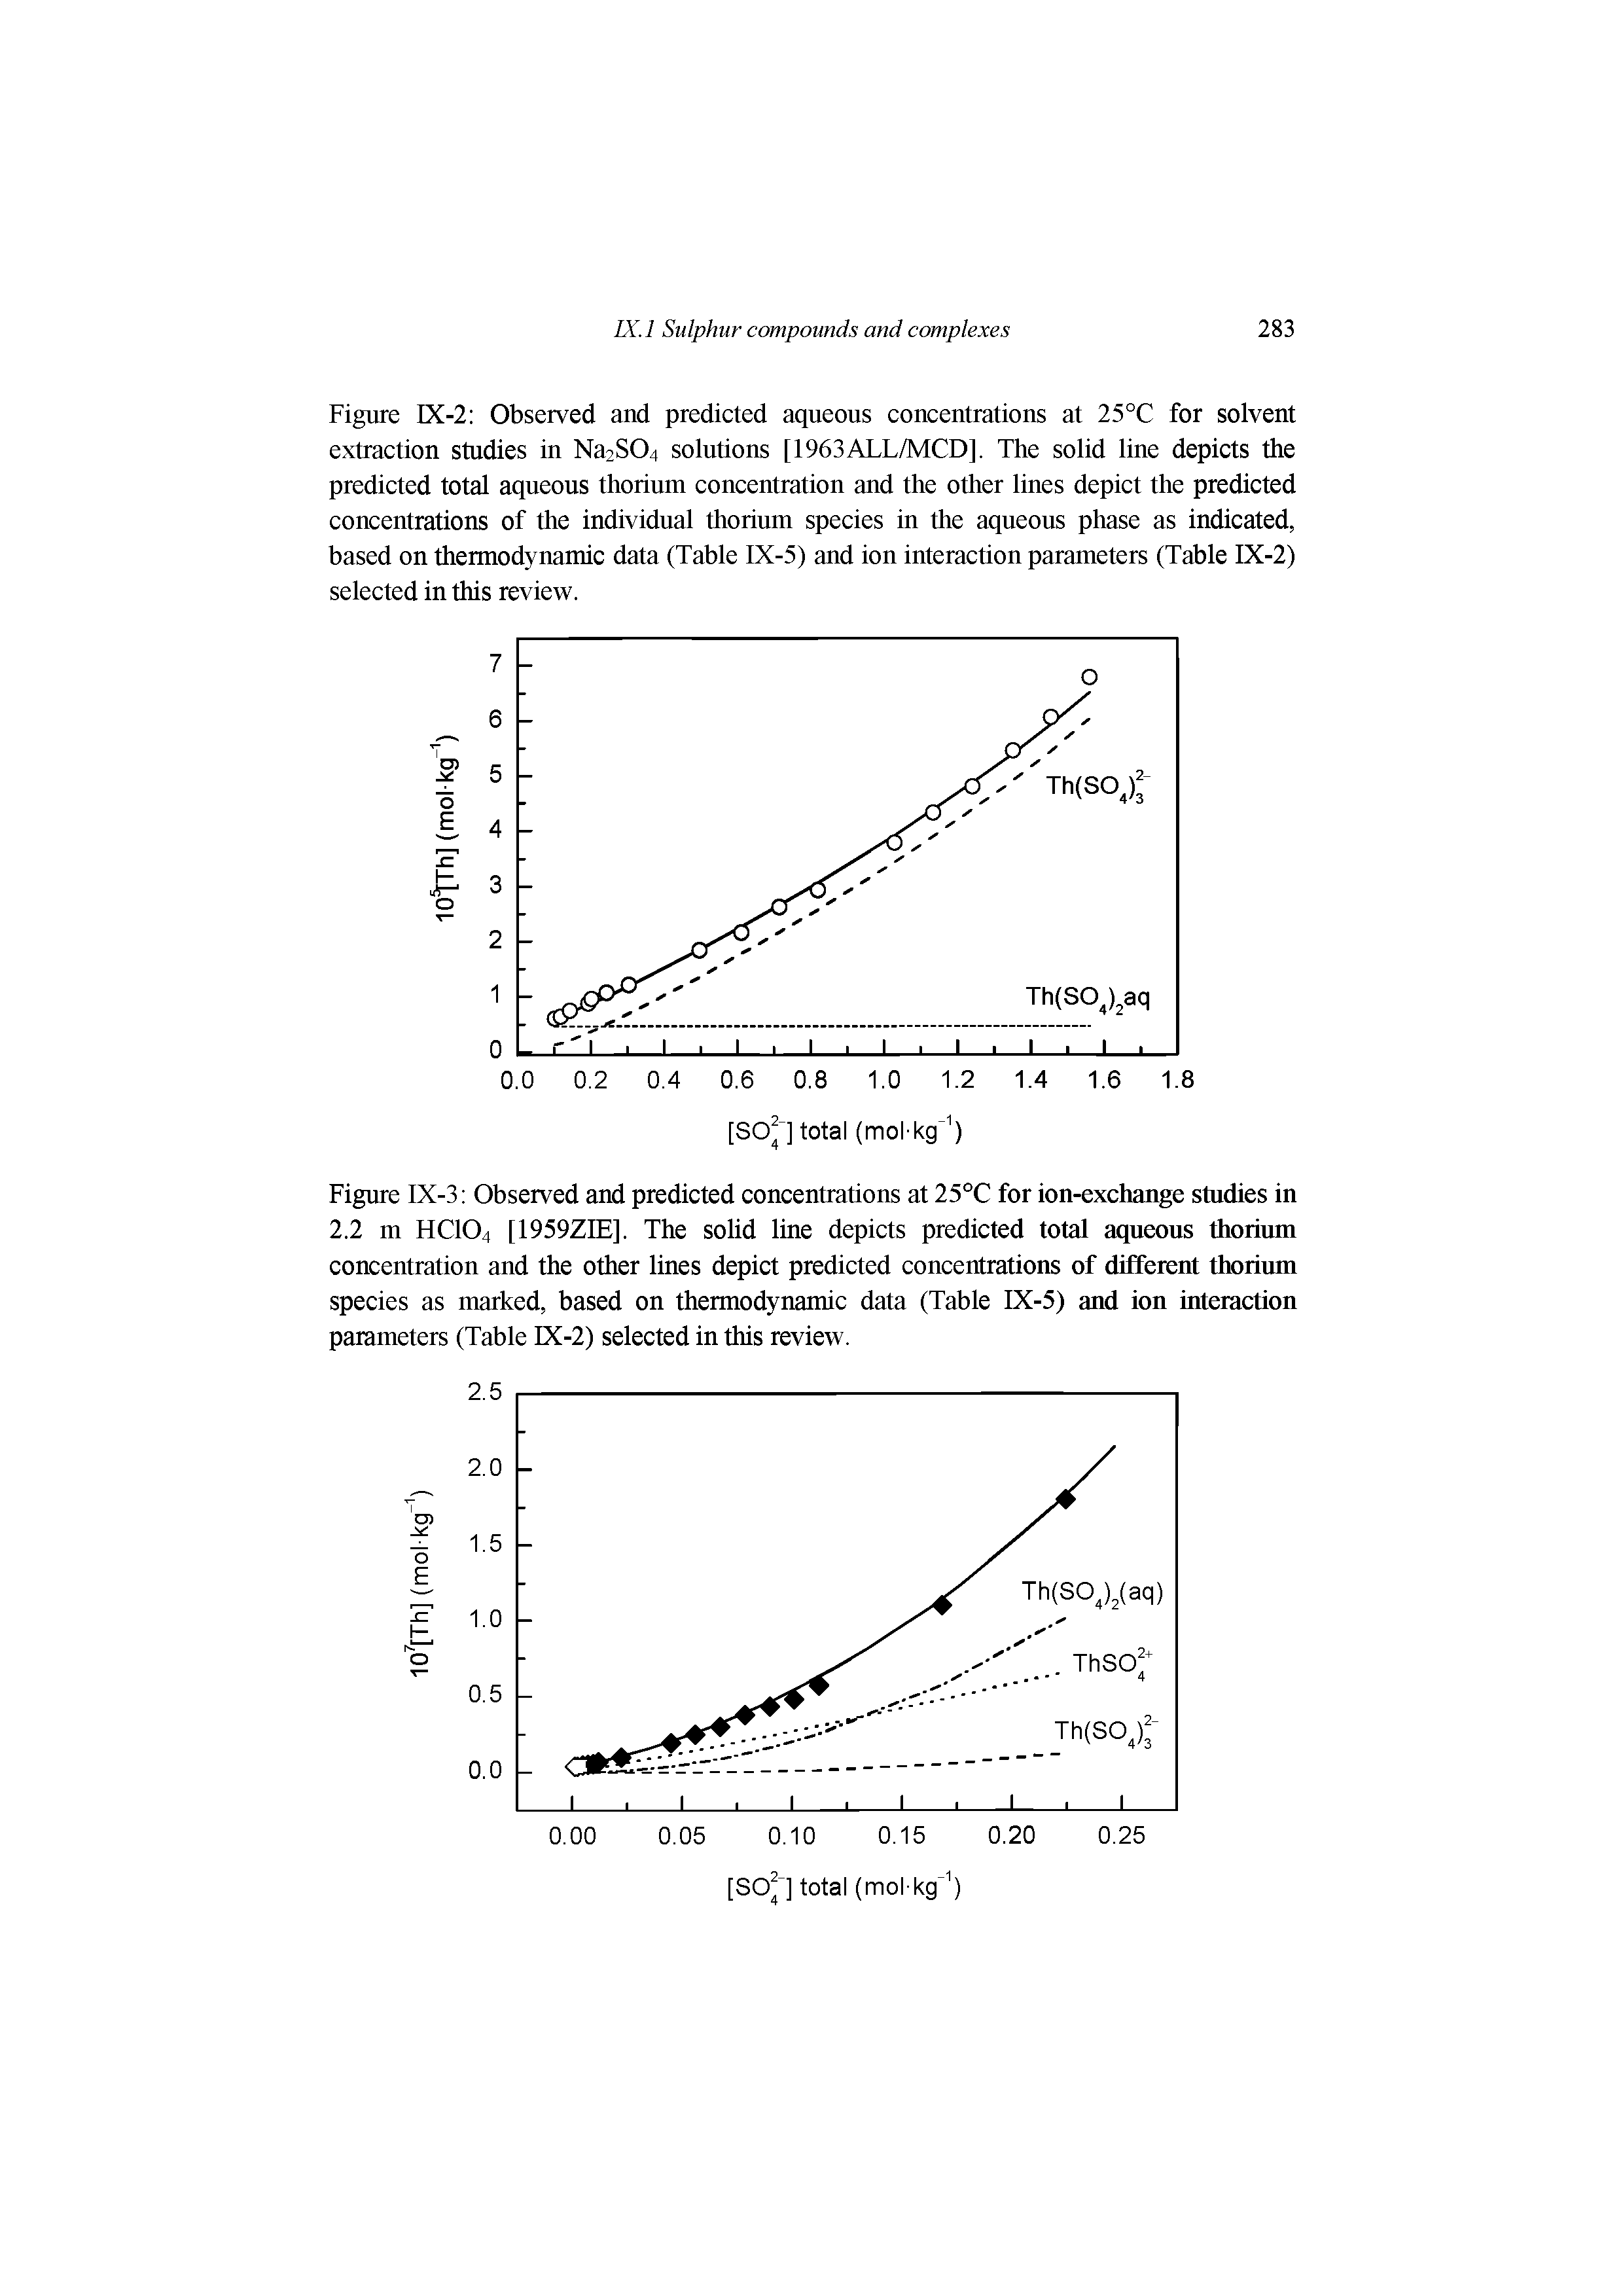 Figure IX-2 Observed and predicted aqueous concentrations at 25°C for solvent extraction studies in Na2S04 solutions [1963ALL/MCD], The solid line depicts the predicted total aqueous thorium concentration and the other lines depict the predicted concentrations of the individual thorium species in the aqueous phase as indicated, based on thermodynamic data (Table IX-5) and ion interaction parameters (Table IX-2) selected in this review.